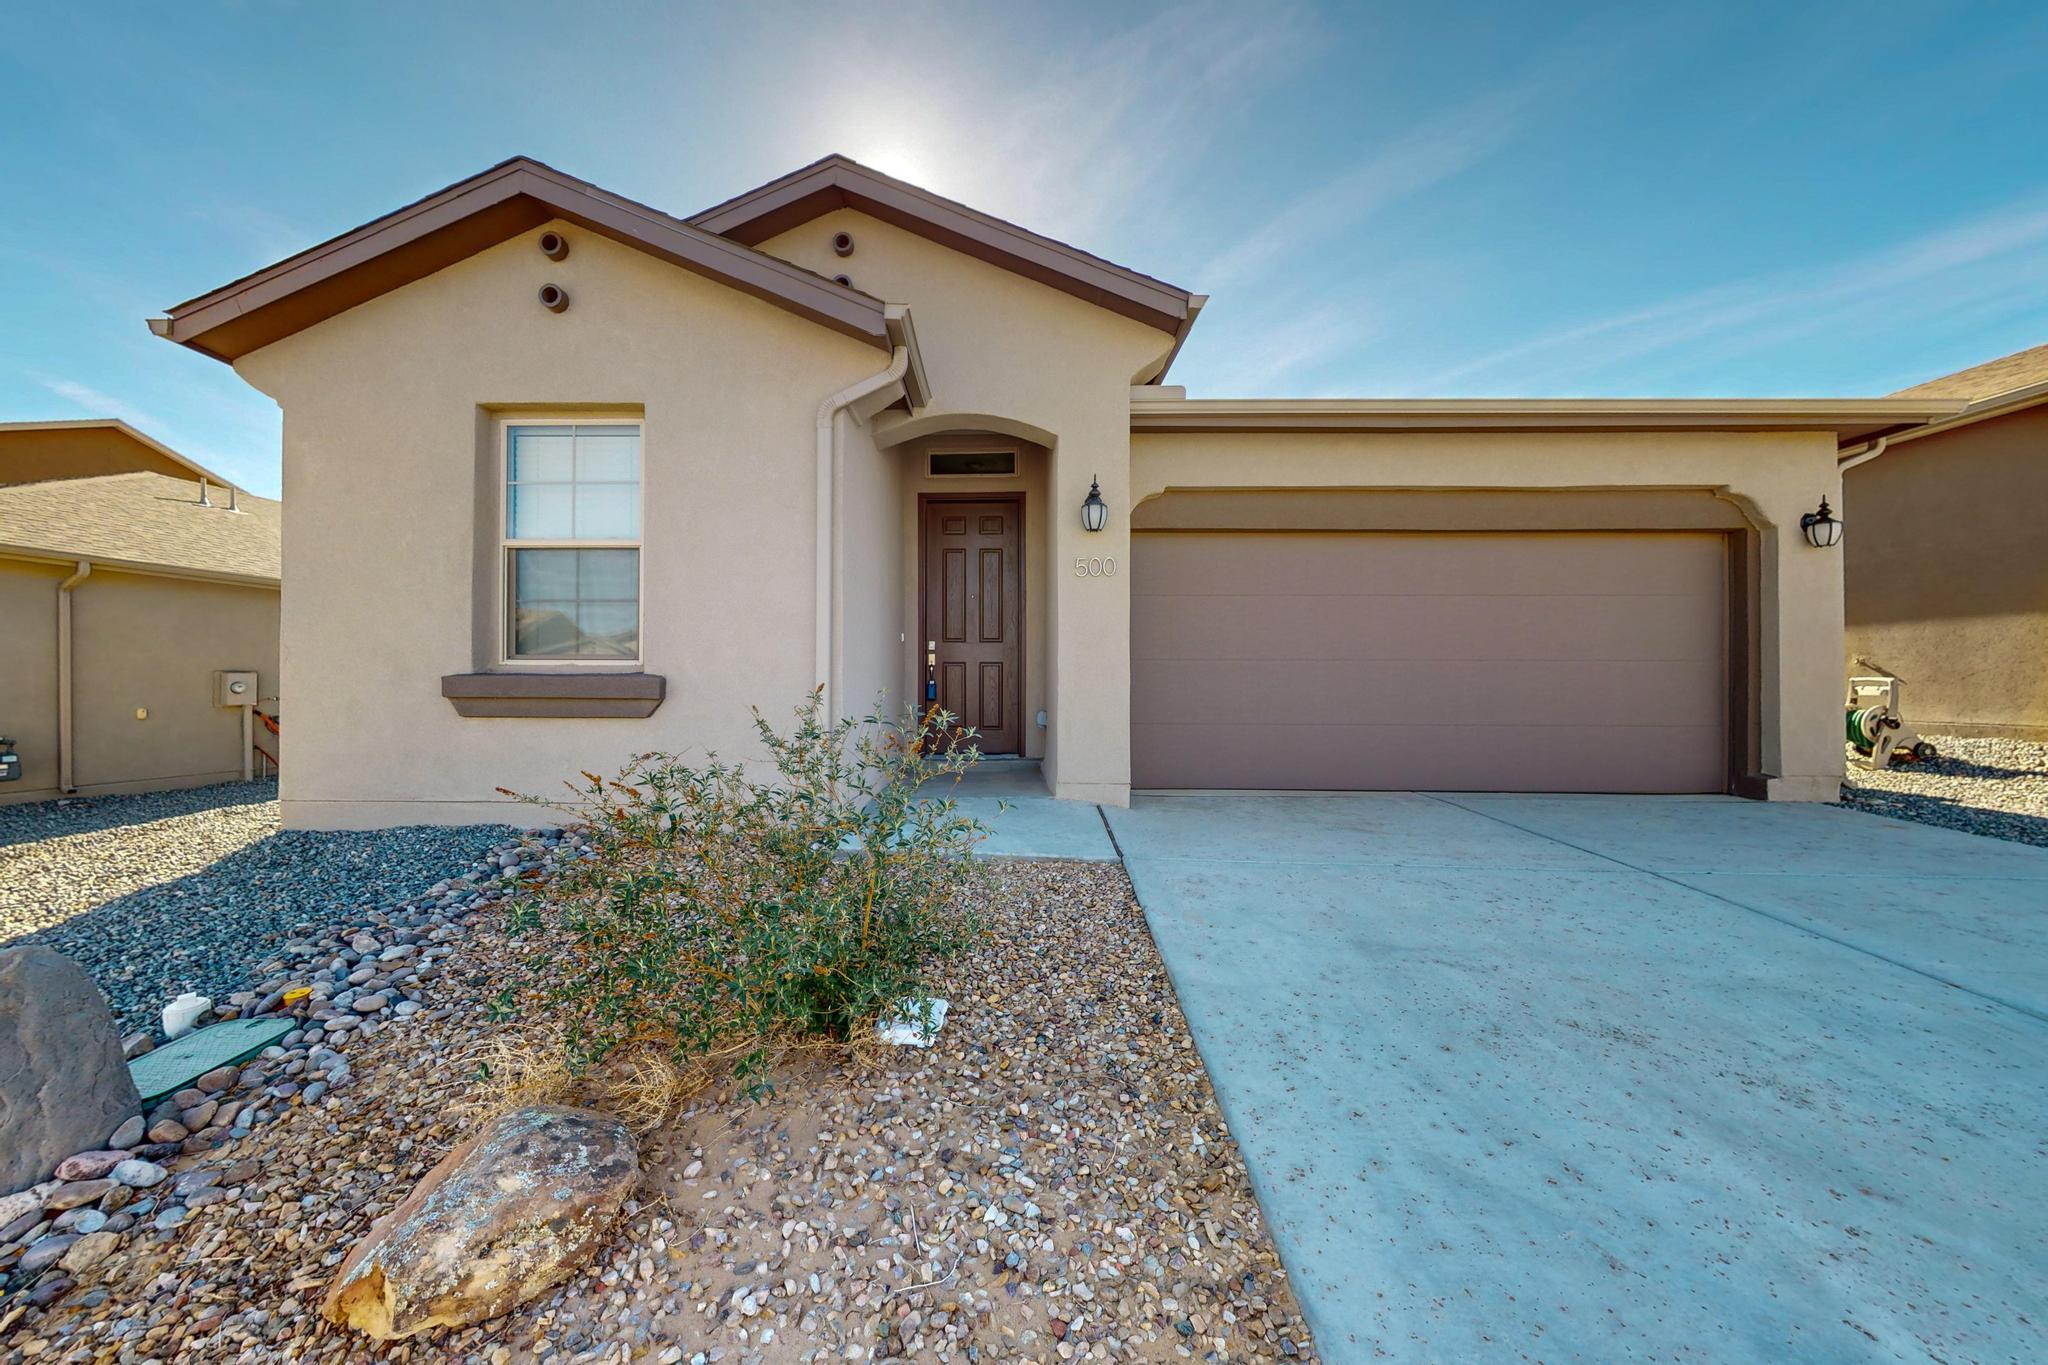 Nestled in the serene landscapes of Los Lunas, this charming Hakes Brothers property offers a perfect blend of comfort and style. Boasting 4 bedrooms and 2 bathrooms, this home is ideal for anyone looking for a cozy retreat. The open floor plan creates a seamless flow between the living, dining, and kitchen areas, perfect for entertaining guests or enjoying family time. Plenty of space for all of your culinary needs. The spacious bedrooms provide ample space for rest and relaxation, while the bathrooms are modern with their finishes.. The backyard offers room for a peaceful escape, perfect for enjoying beautiful Albuquerque weather! Schedule your showing today!